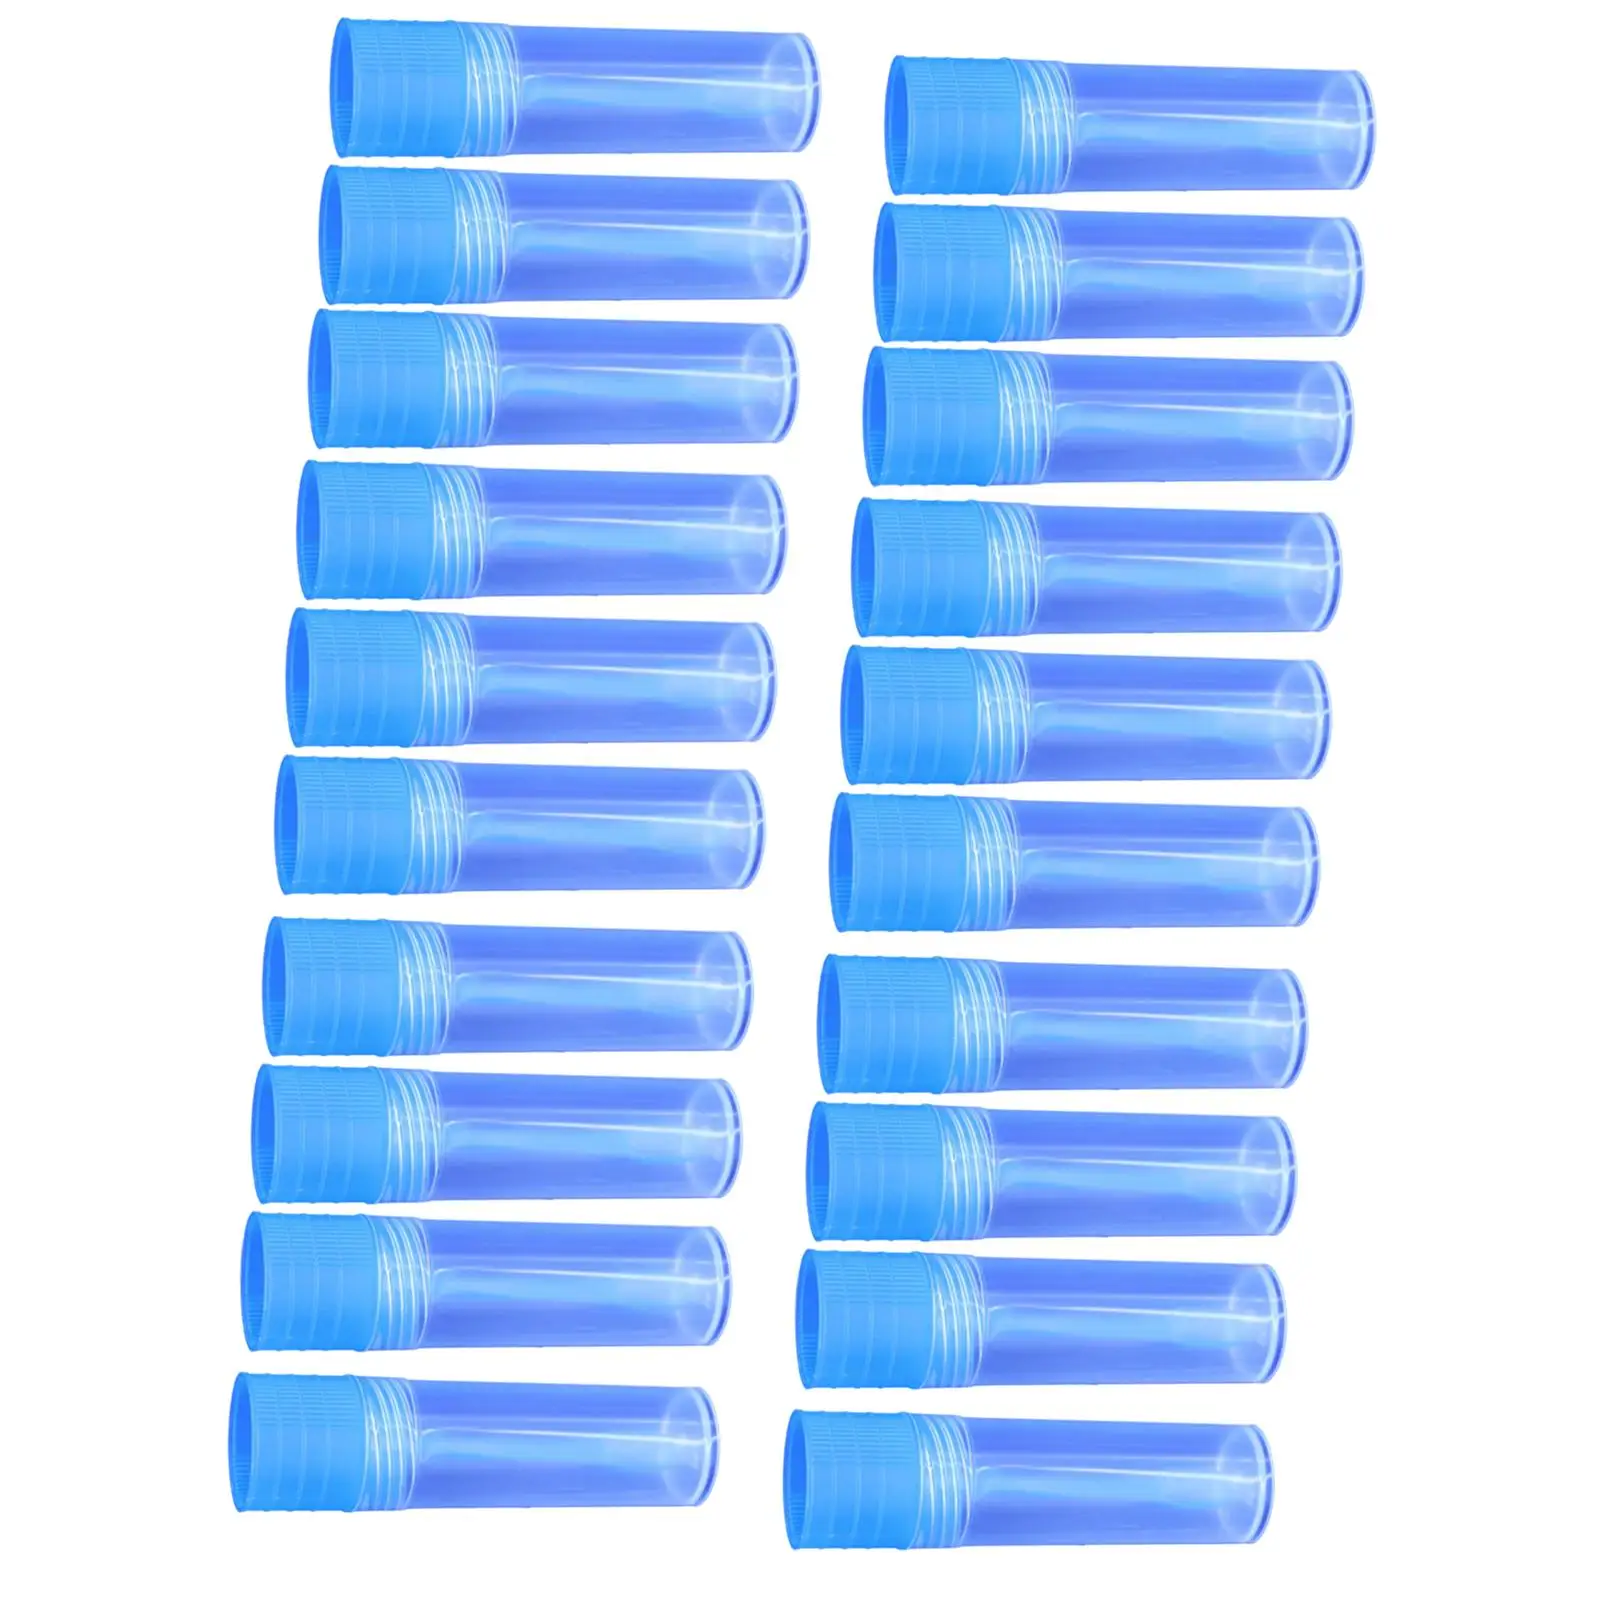 20Pcs Fecal Collection Containers, spoon, Screw Hat Chair Tubes, Cup, Specimen Bottle Tubes